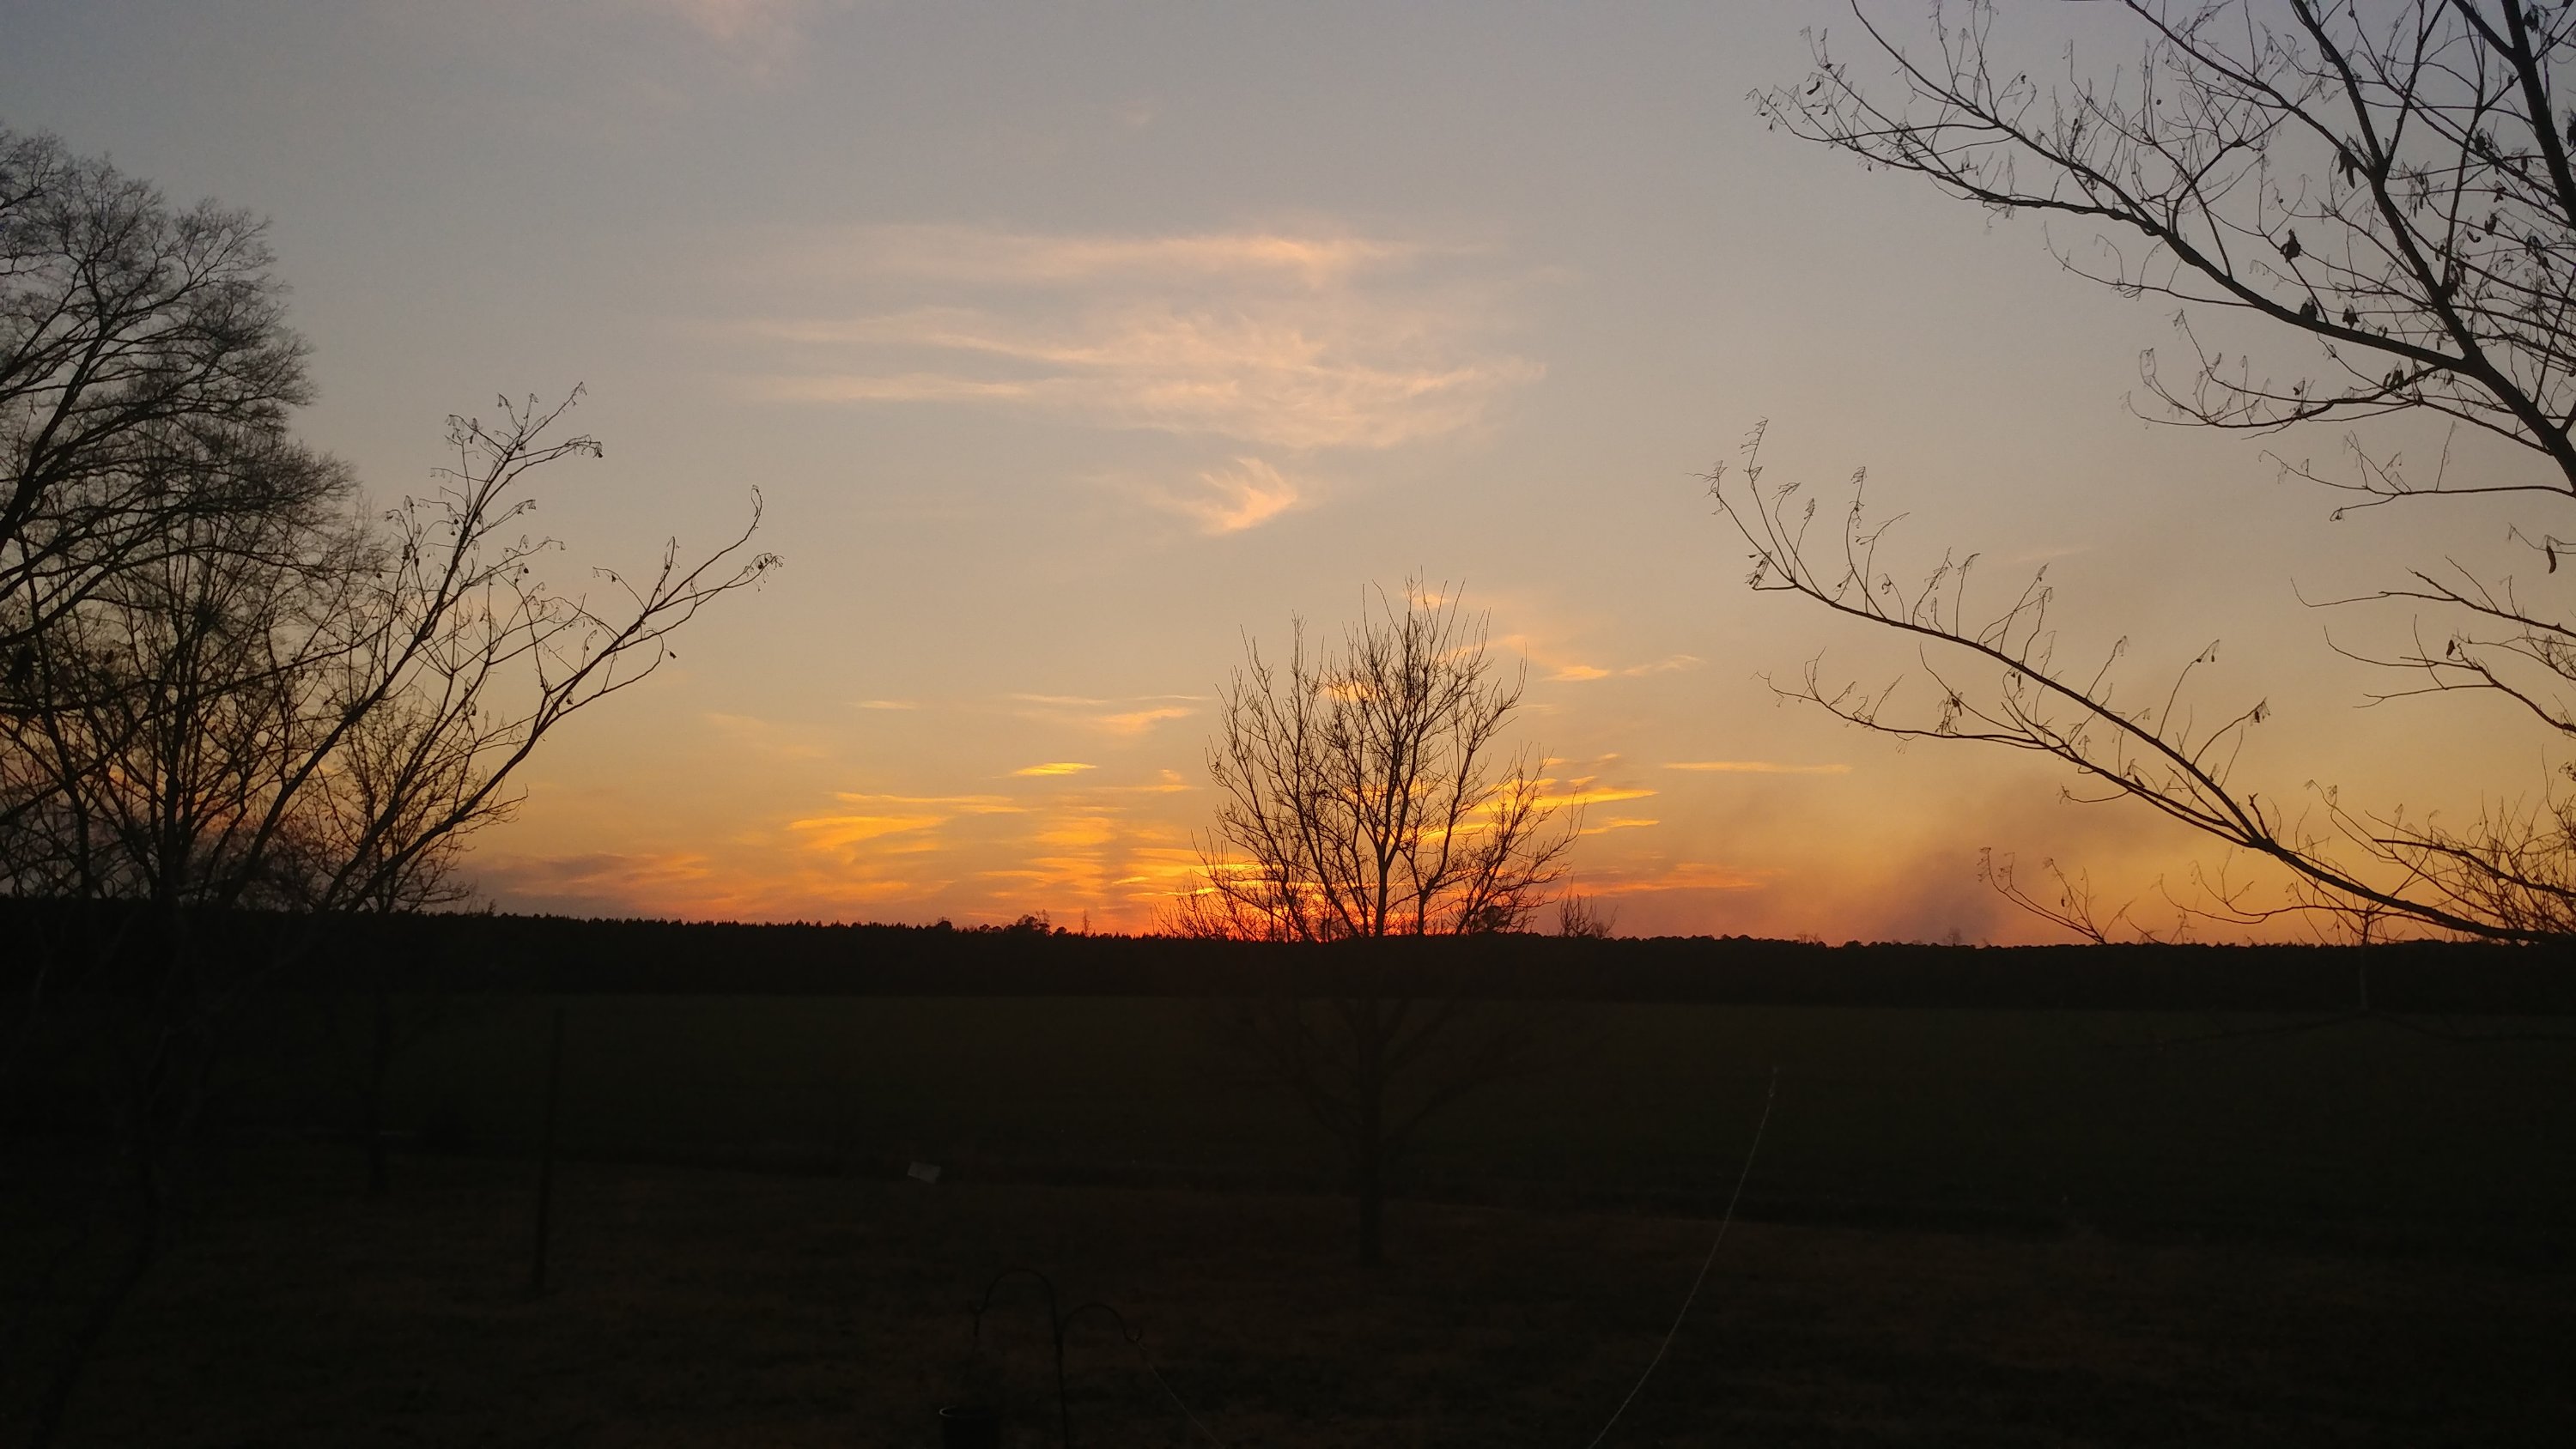 Another beautiful sunset at the homestead